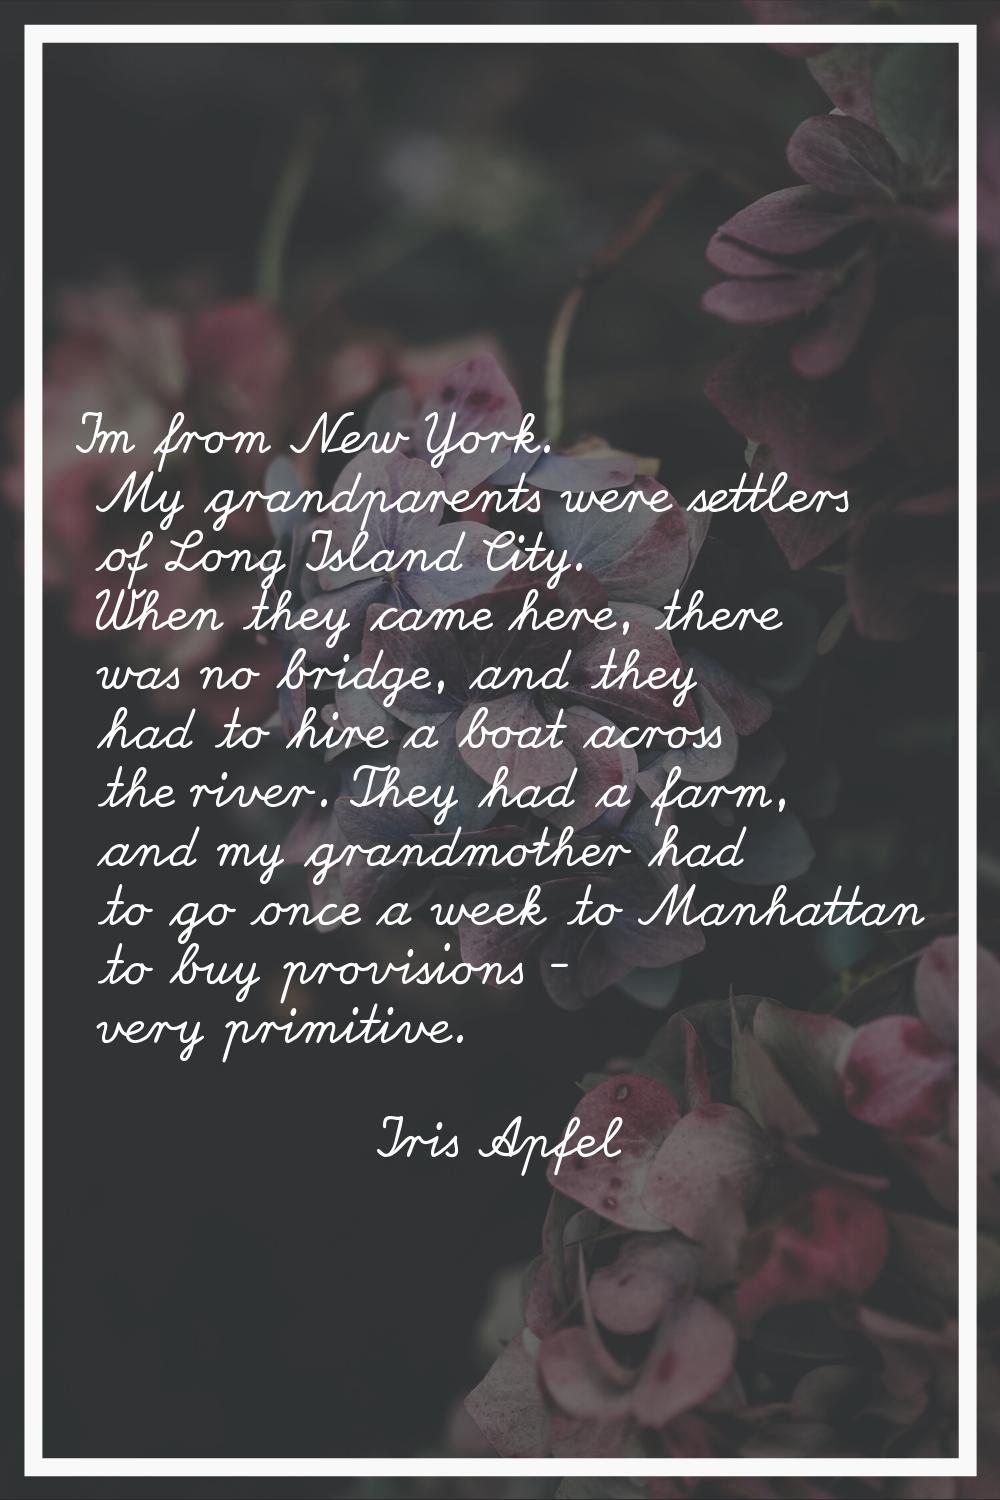 I'm from New York. My grandparents were settlers of Long Island City. When they came here, there wa